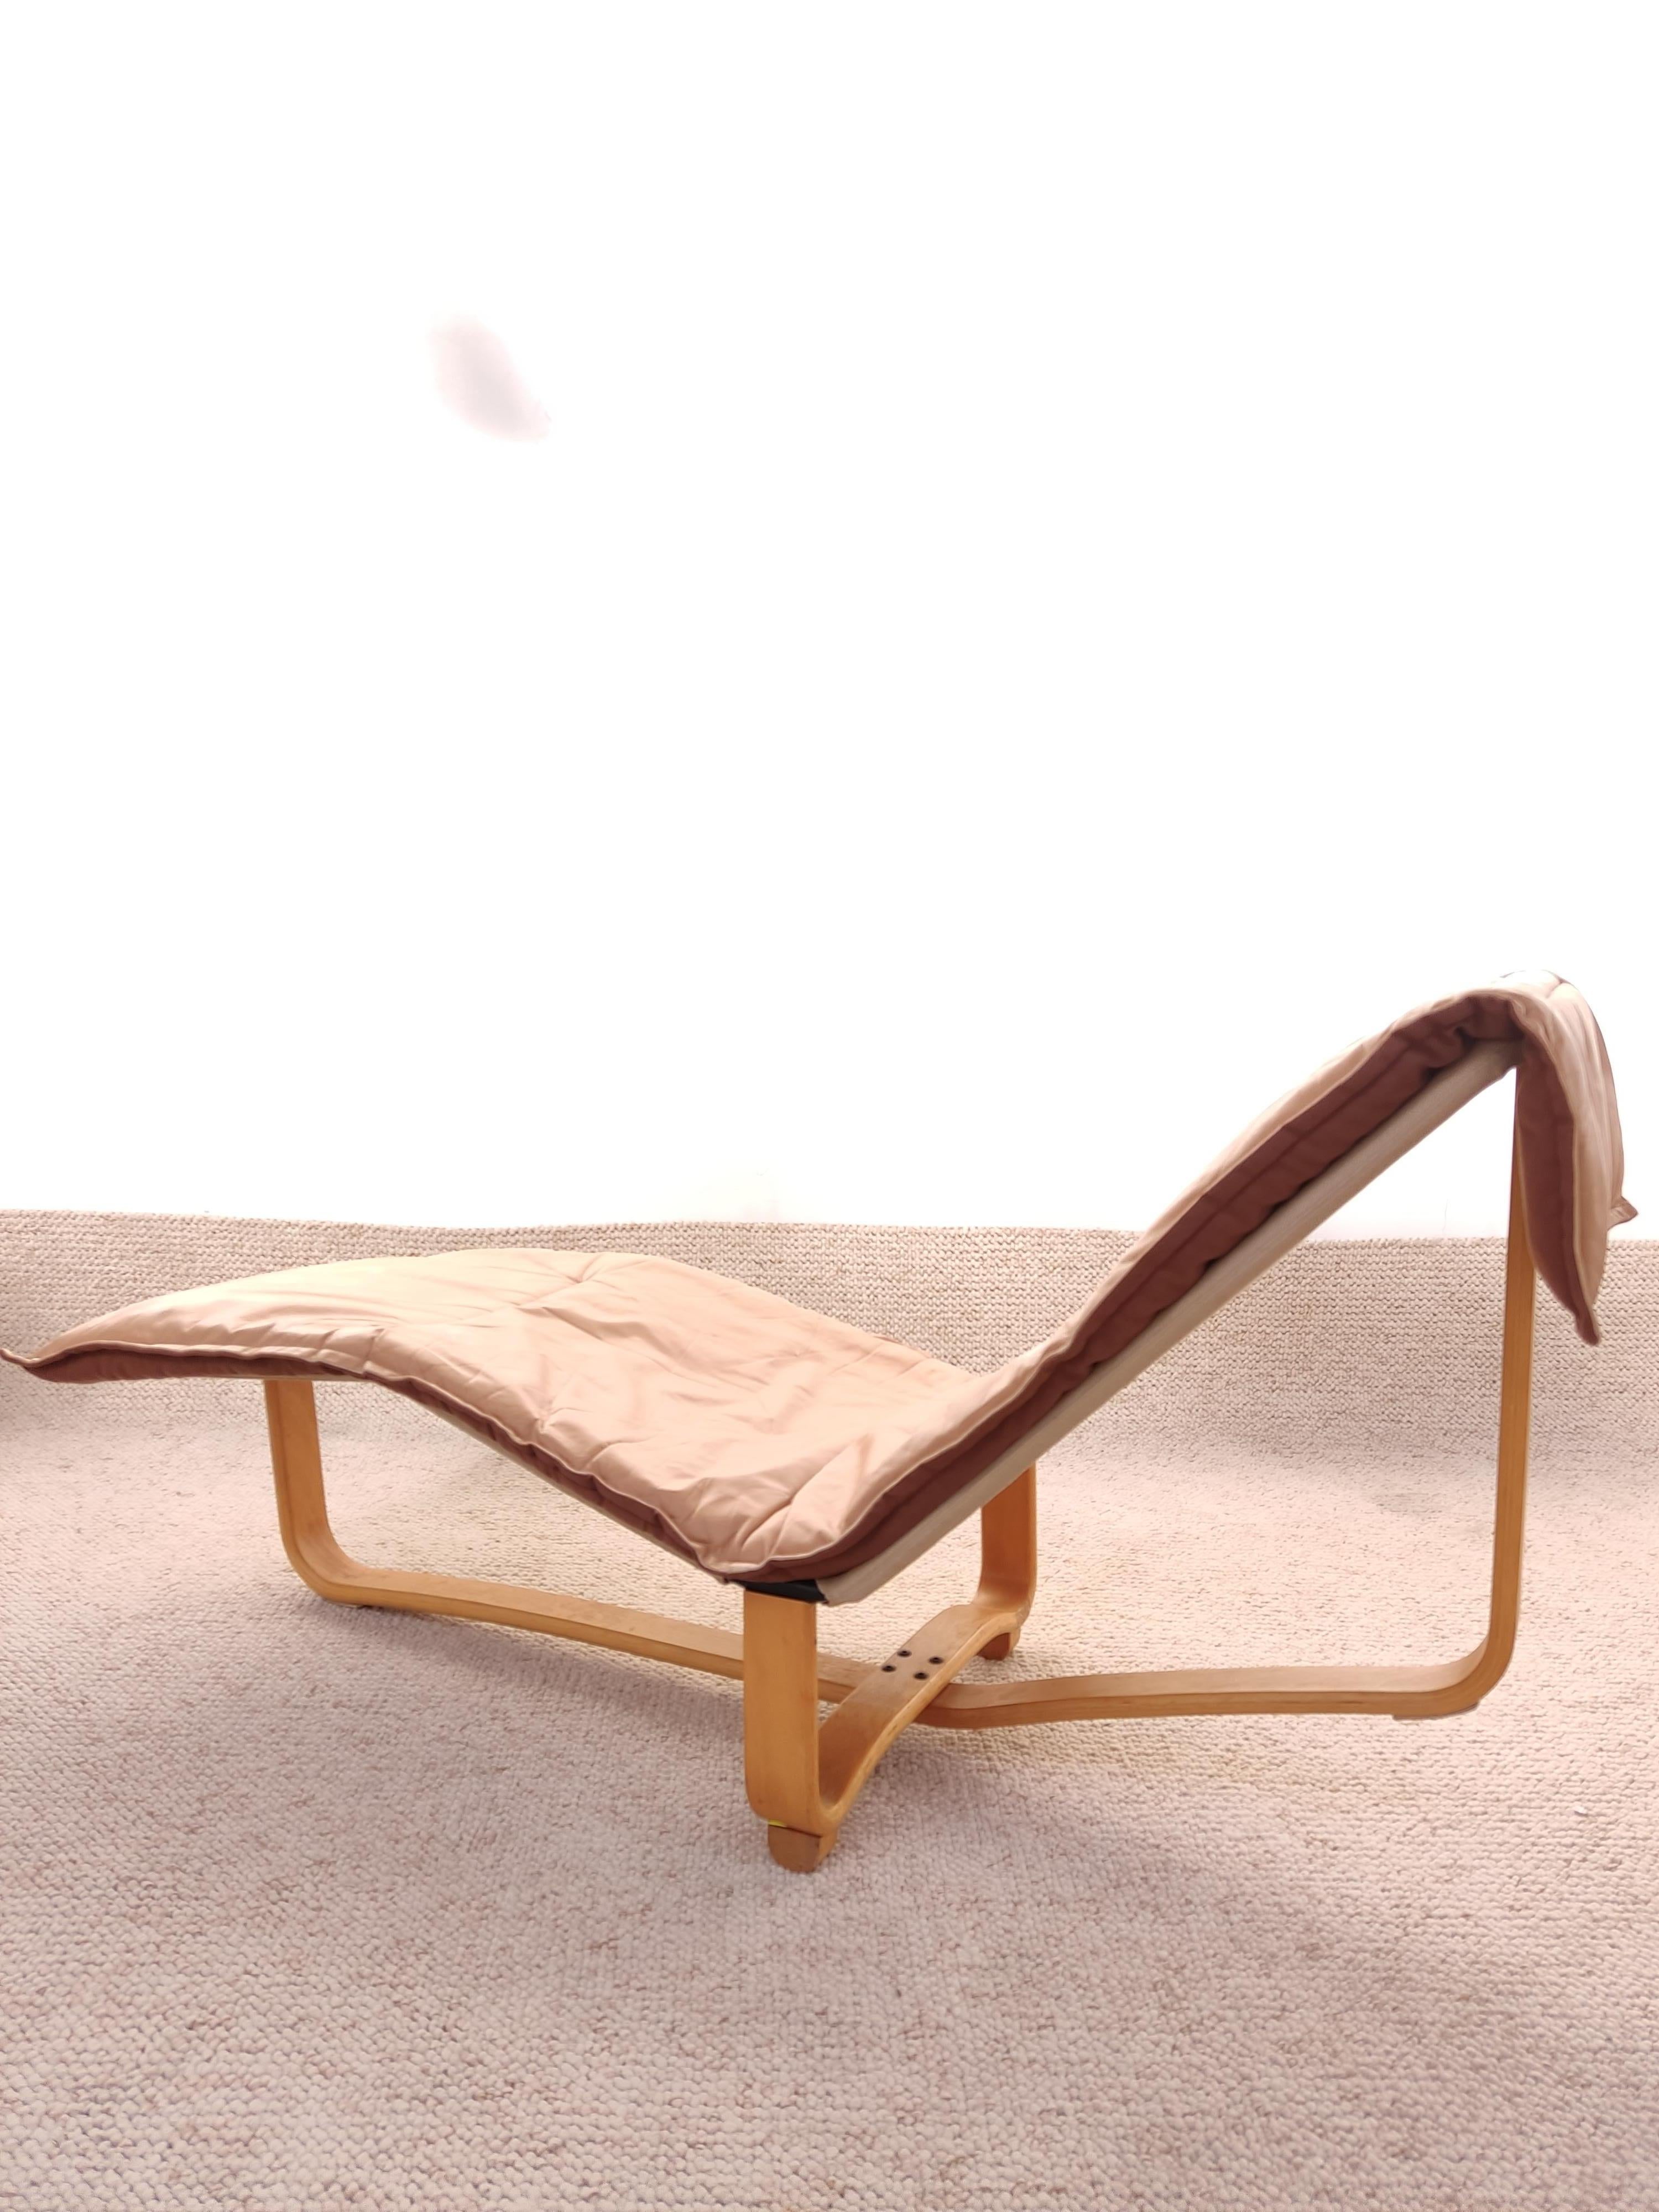 Chaise-Longue Ingmar & Relling, Camel Leather, 1970 1